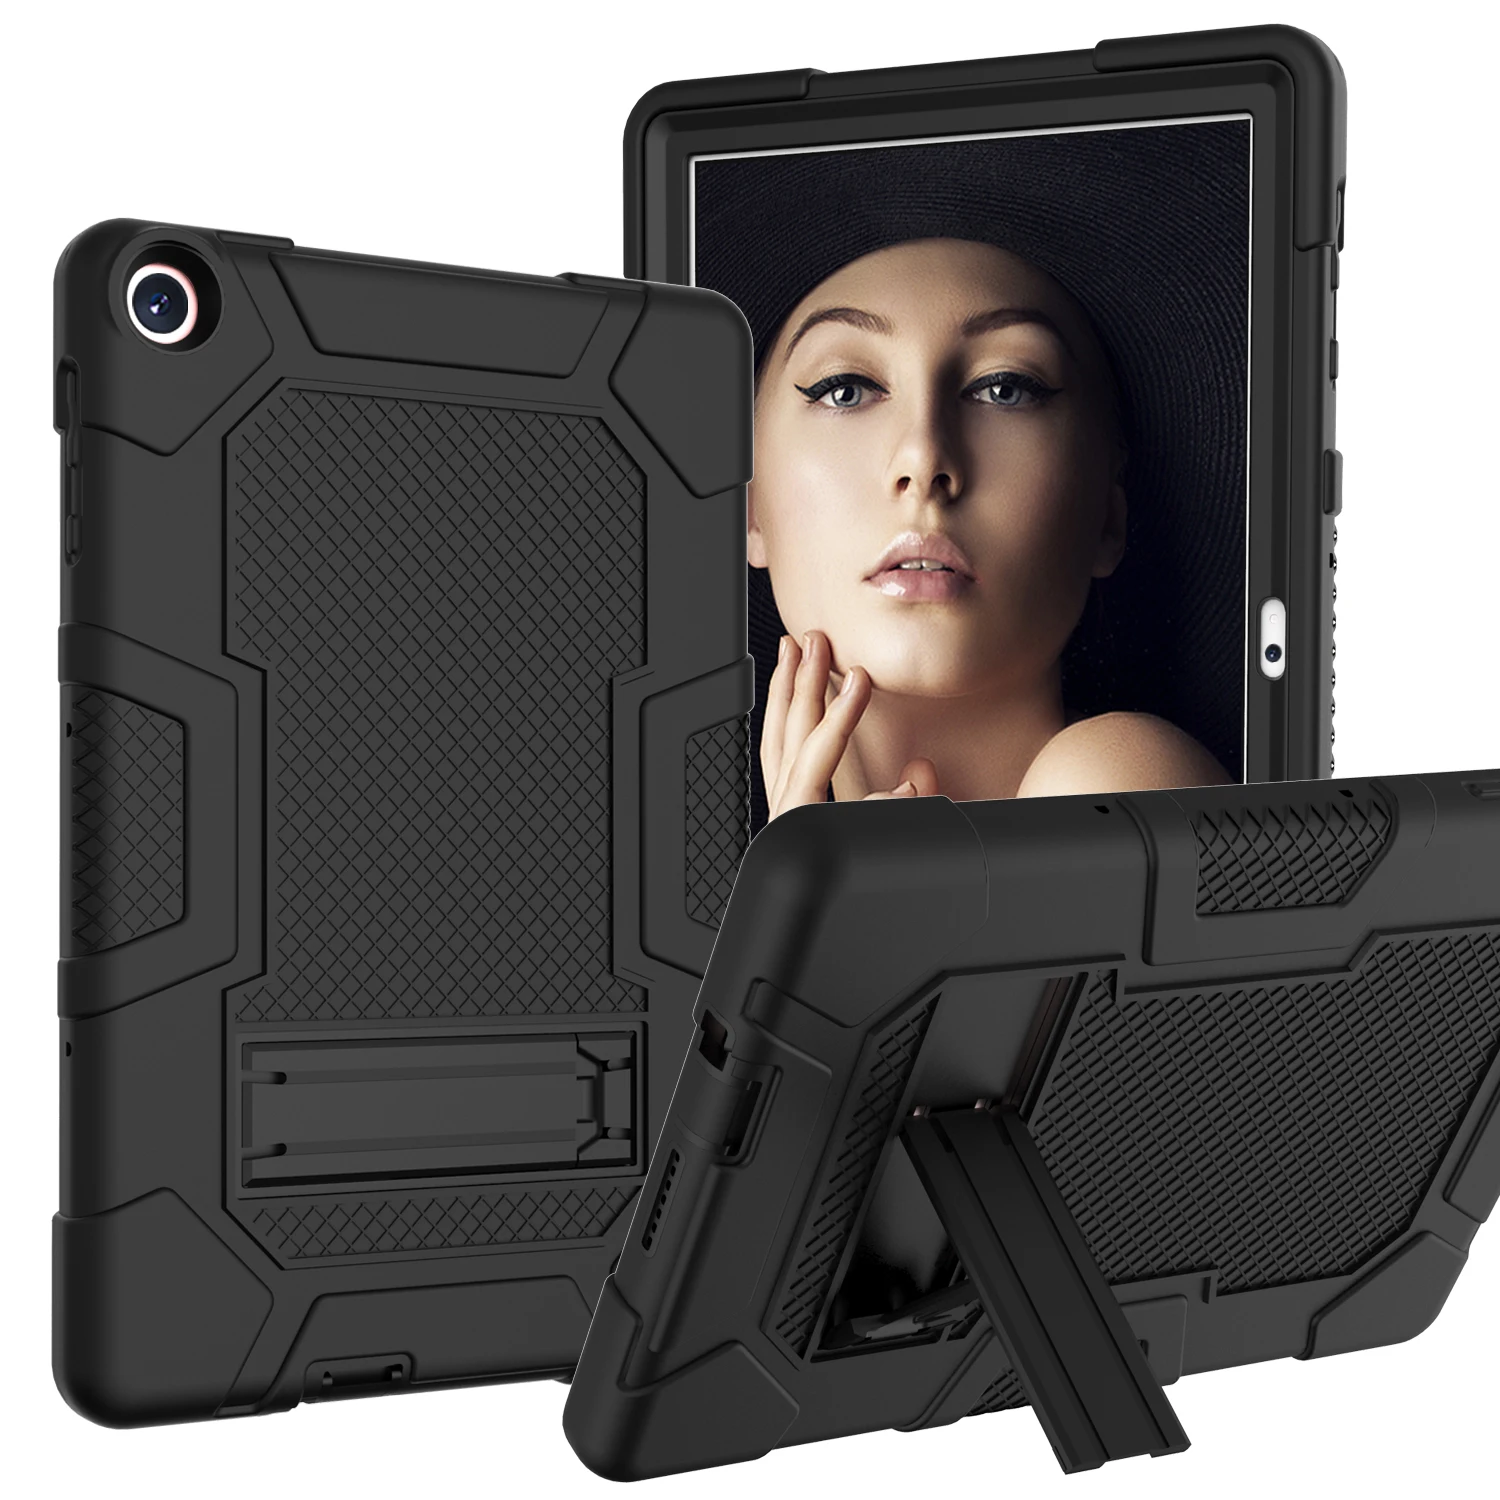 

Heavy Duty Case For Huawei Matepad 9.7 Inch T10 /T10s 10.4 Inch Rugged Tough Armor Defender Shockproof Kickstand Tablet Cover